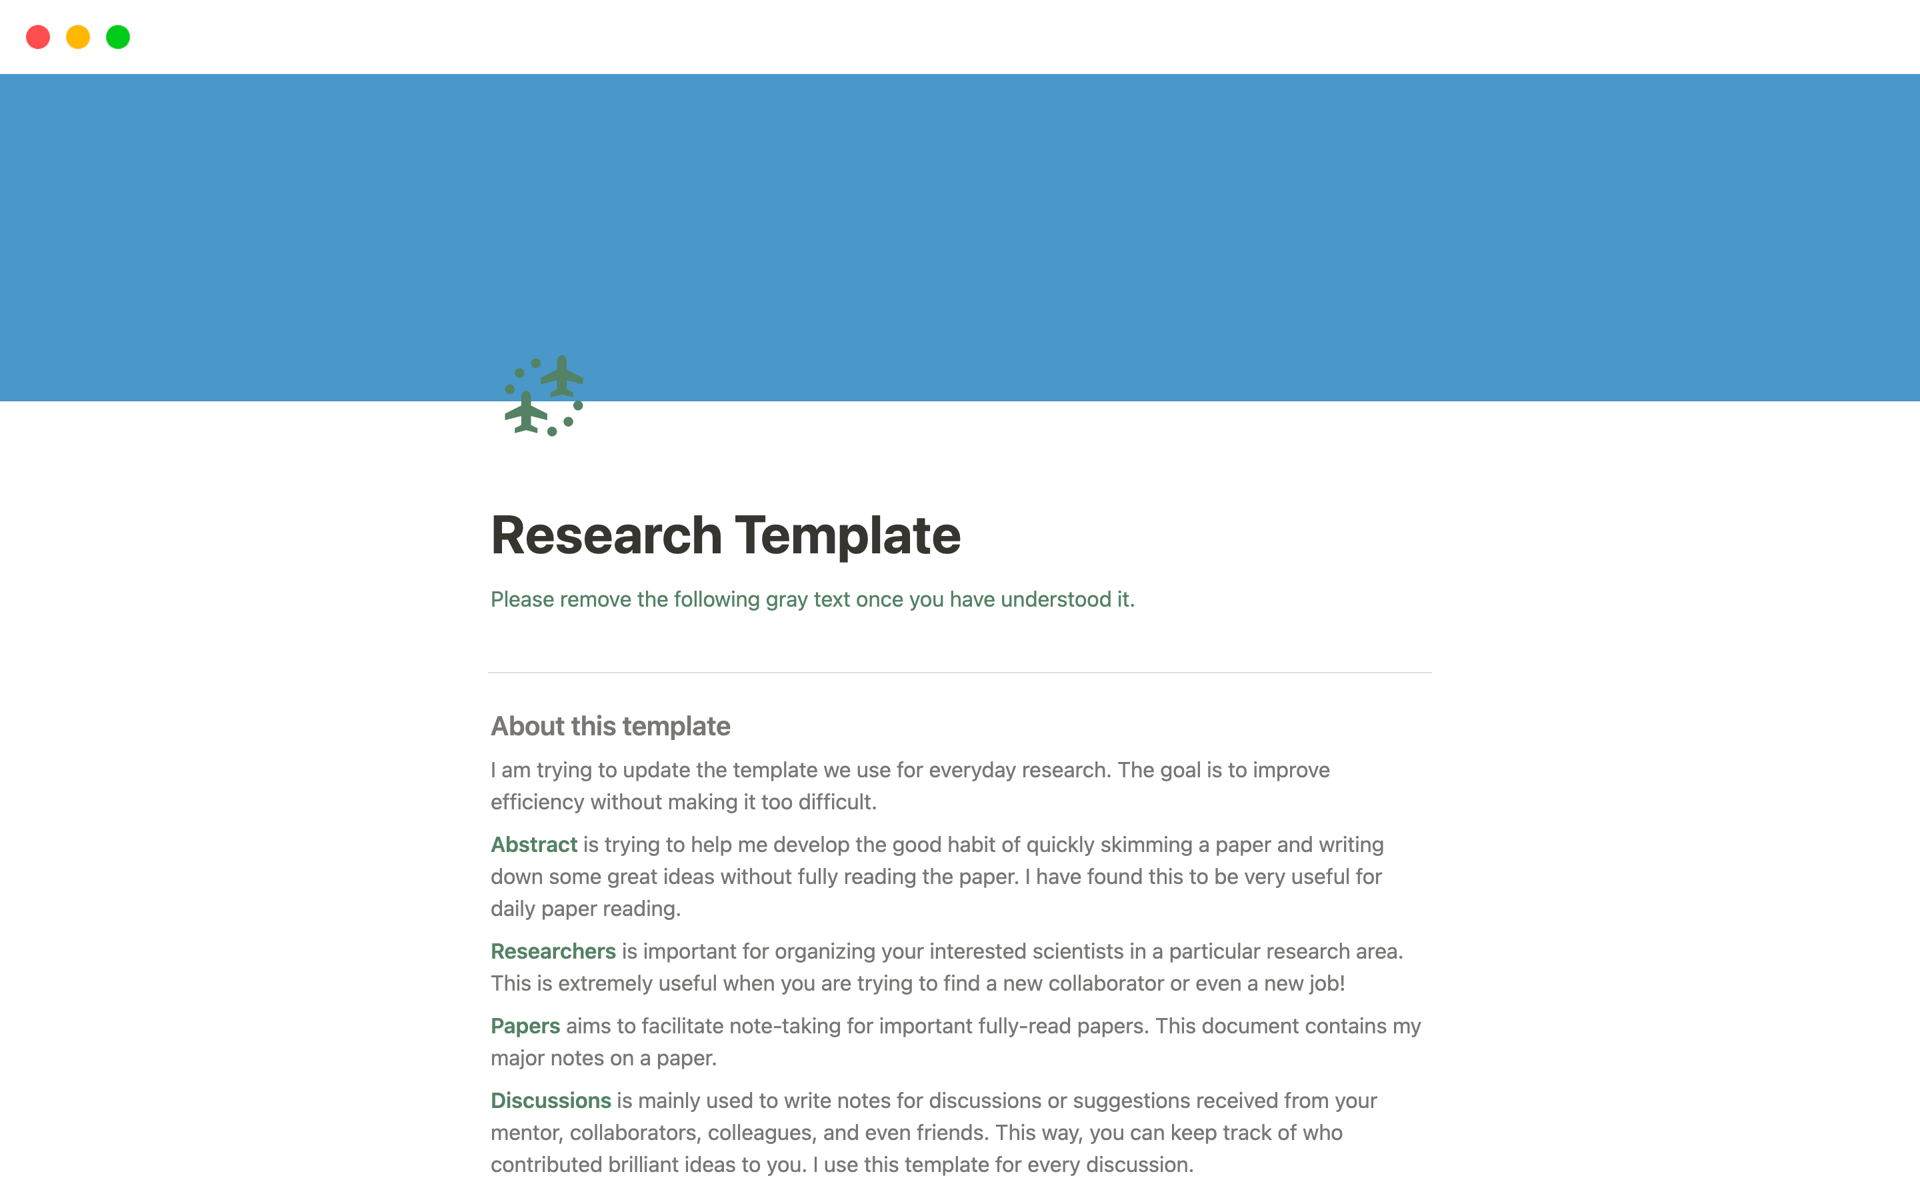 Research templates for inspiring your next world-changing idea!